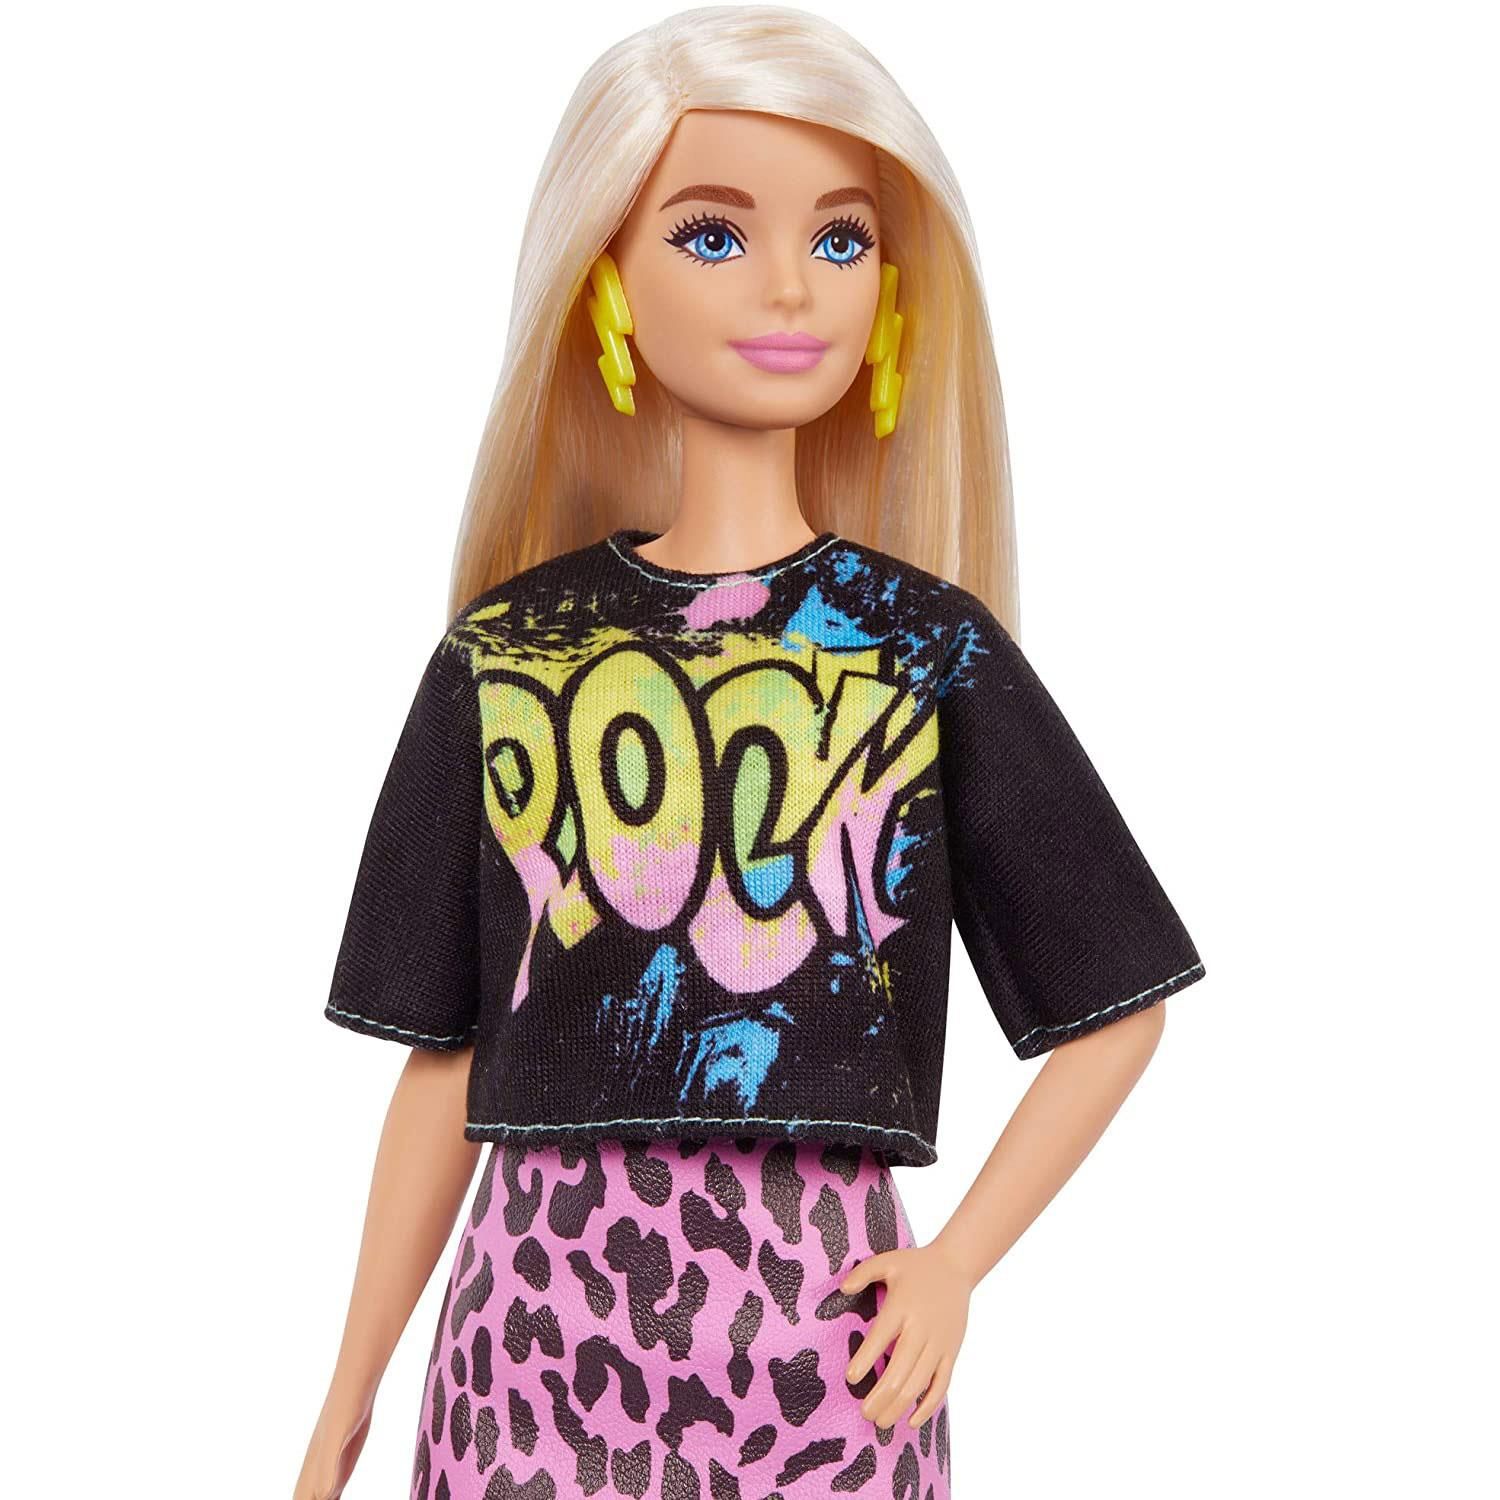 Barbie Fashionista Doll with Rock Tee, Great Toy For 3 Years Old & Up

Barbie and Ken Fashionistas celebrate diversity with fashion dolls that encourage real-world storytelling and open-ended dreams! With a wide variety of skin tones, eye colours, hair colours and textures, body types and fashions, the dolls are designed to reflect the world kids see today - and their attention-grabbing outfits help them stand out with personalities that pop! Use the reusable vinyl package to fill, carry and customize - store Barbie fashions and accessories, carry a doll anywhere, even decorate it and use it for self-expression! Kids can collect Barbie dolls and accessories for infinite ways to play out stories, express their own style and discover that fashion is fun for everyone! Includes Barbie Fashionistas doll wearing fashions and accessories. 

Features:

The latest line of Barbie Fashionistas dolls includes different body types and a mix of skin tones, eye colours, hair colours, hairstyles and so many fashions inspired by the latest trends.
The Barbie doll is the Original body type and wears a black t-shirt with a colourful 